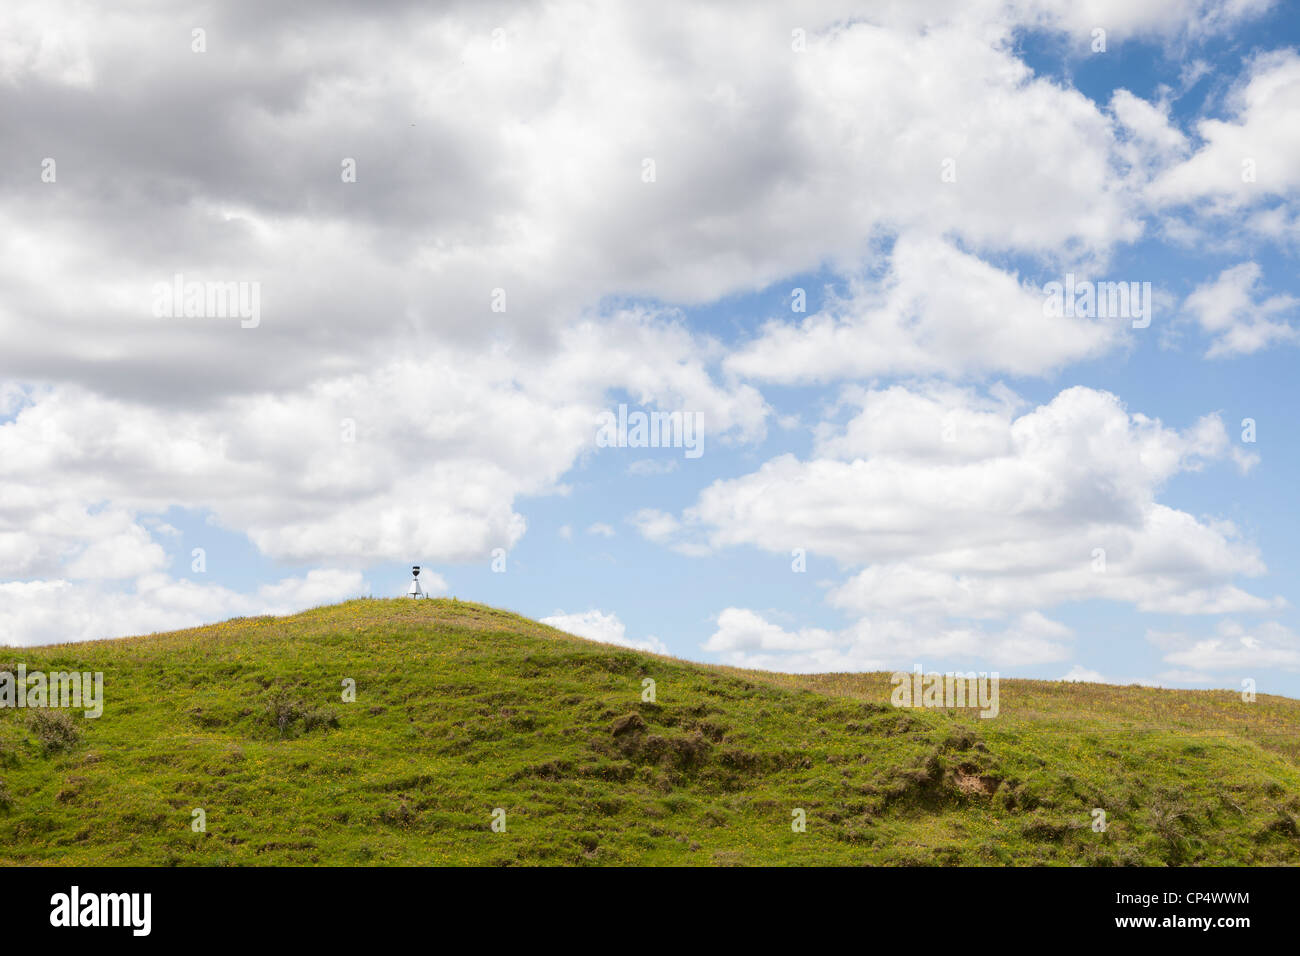 A pastoral scene with blue sky, fluffy clouds, and green grass fields in northern New Zealand Stock Photo